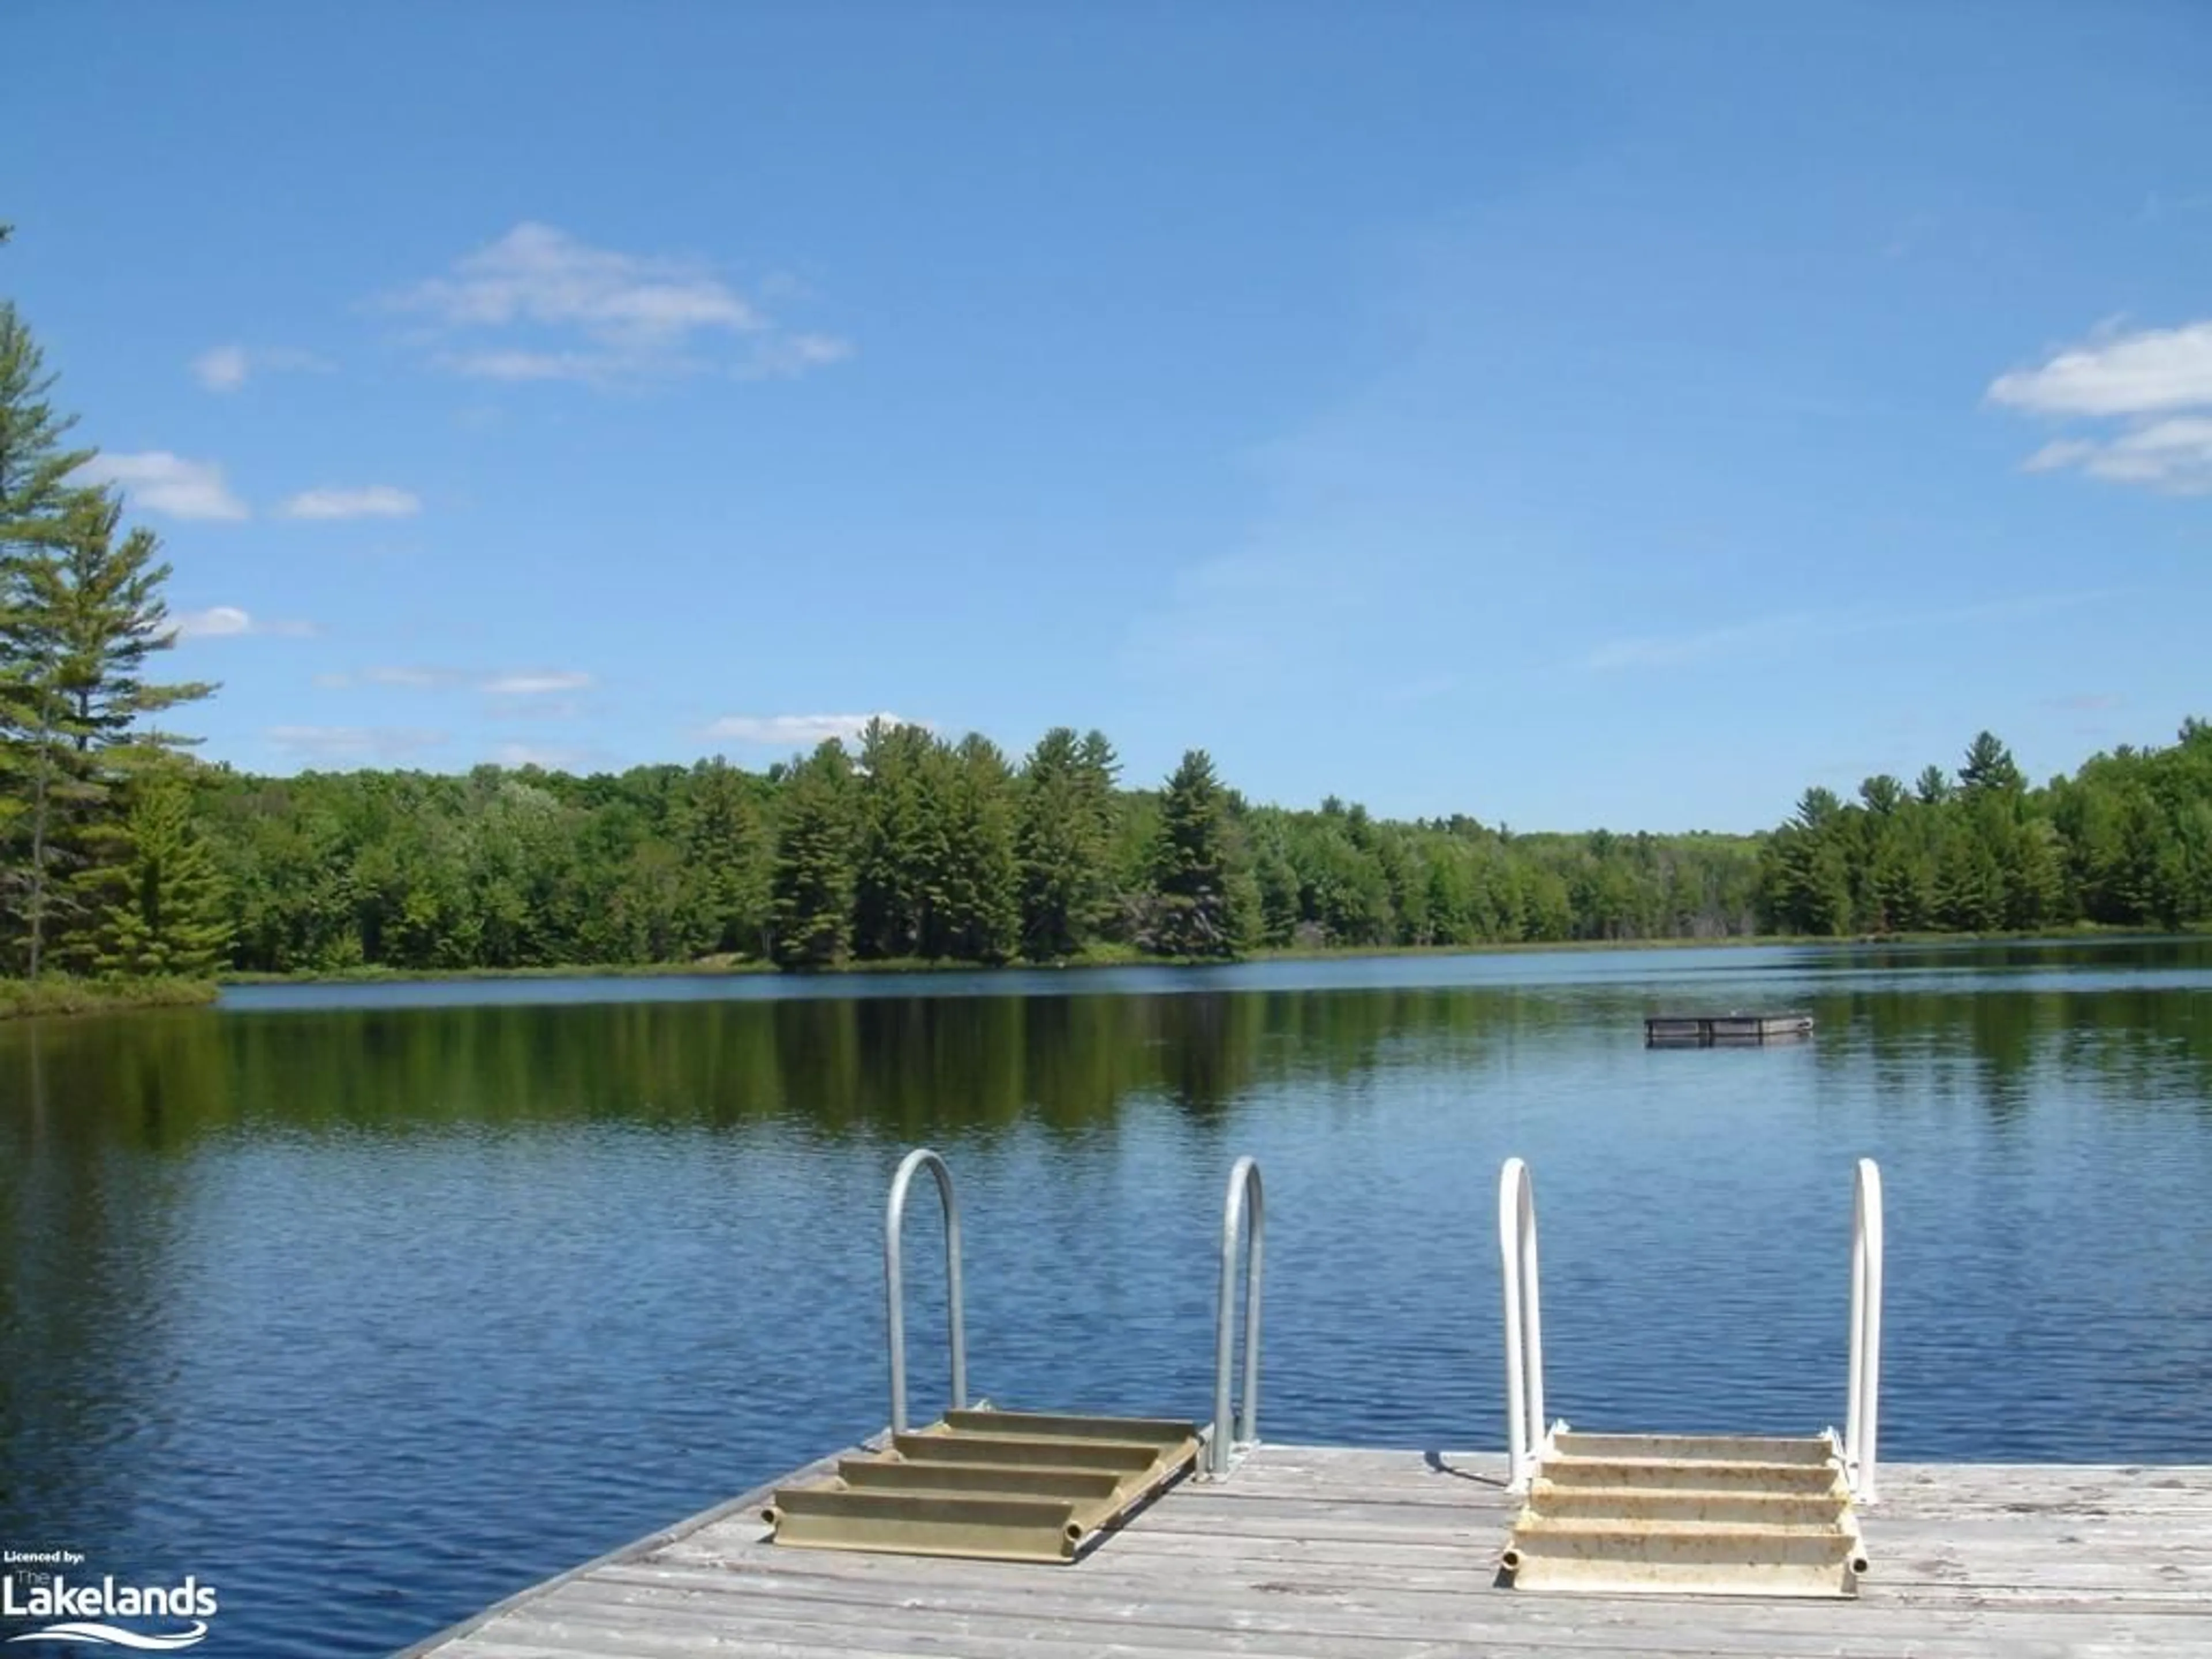 Lakeview for LOT 9 Concession 5, Baysville Ontario P0B 1A0